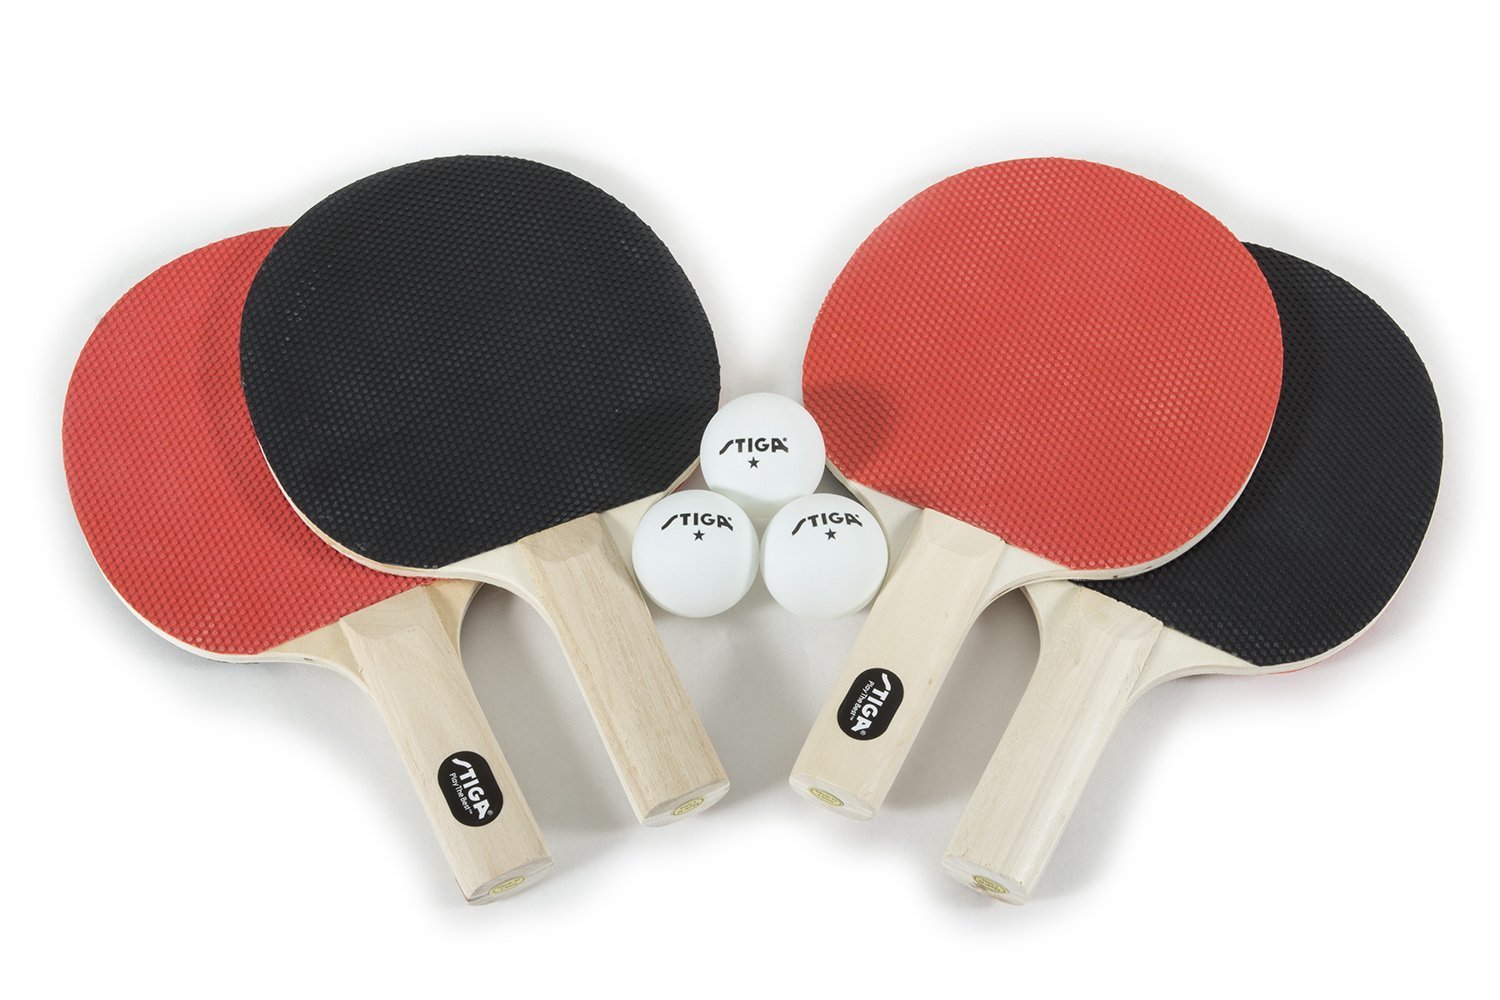 Portable Ping Pong Kit for Children Adults and Beginners Outdoor Indoor Sports Games Equipment Includes 2 Table Tennis Paddle and 3 Balls Kaiyan Professional Table Tennis Bat Set